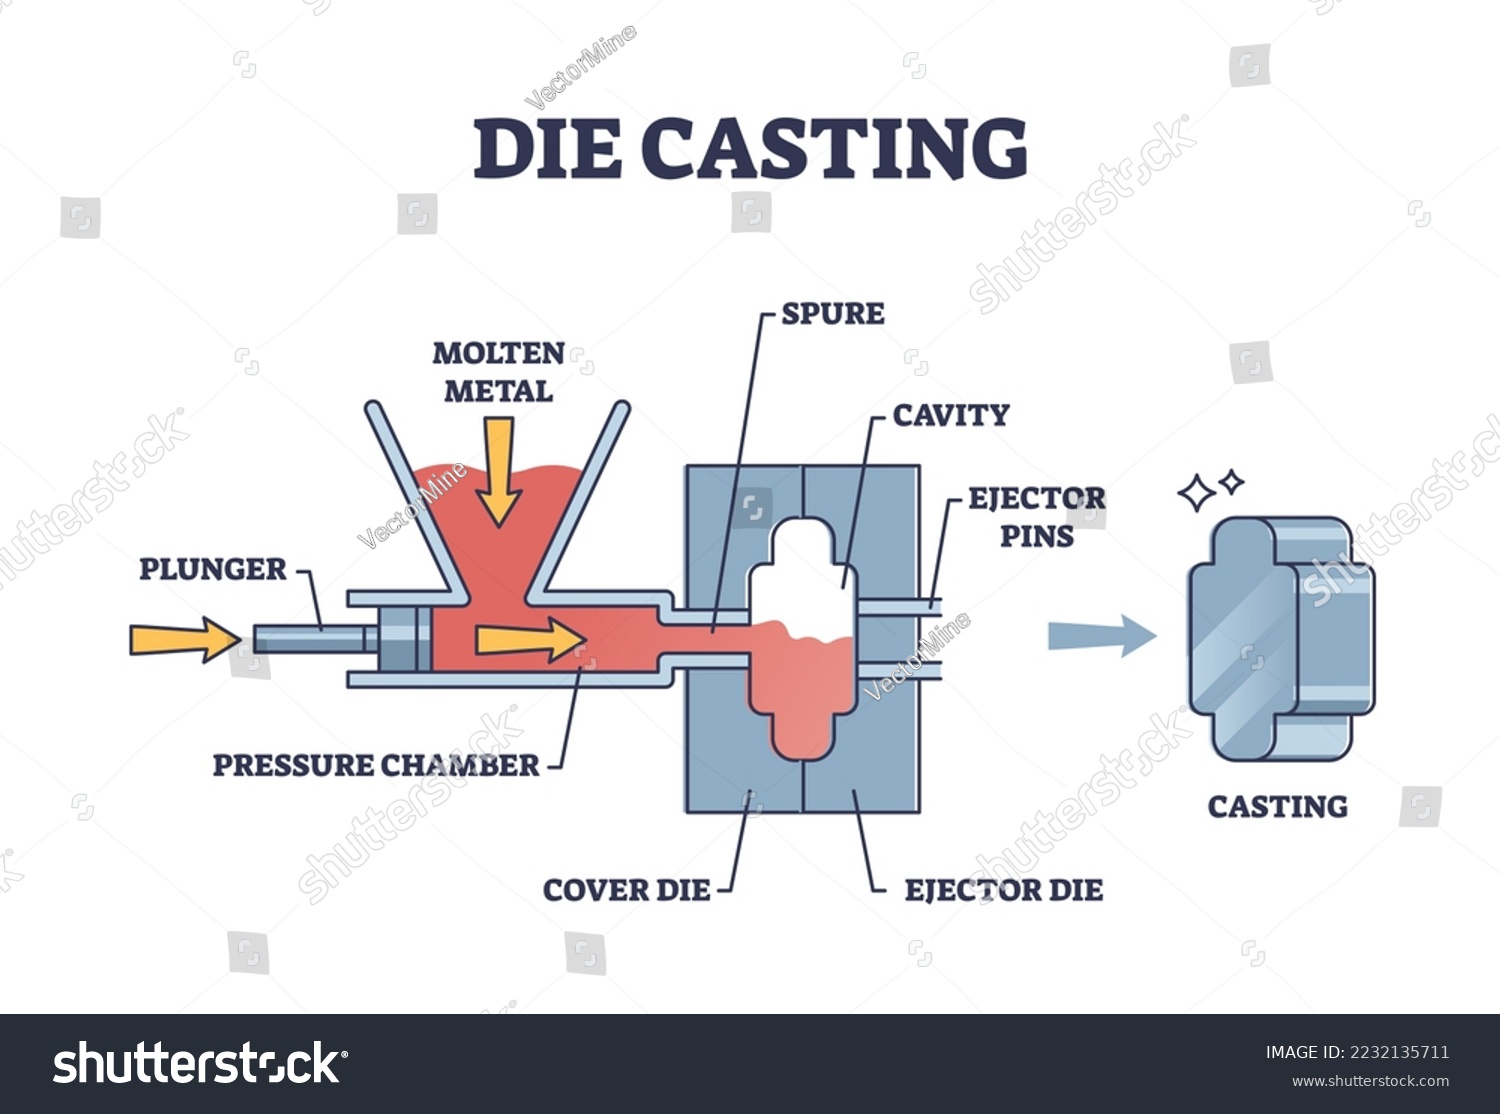 a diagram of a die casting